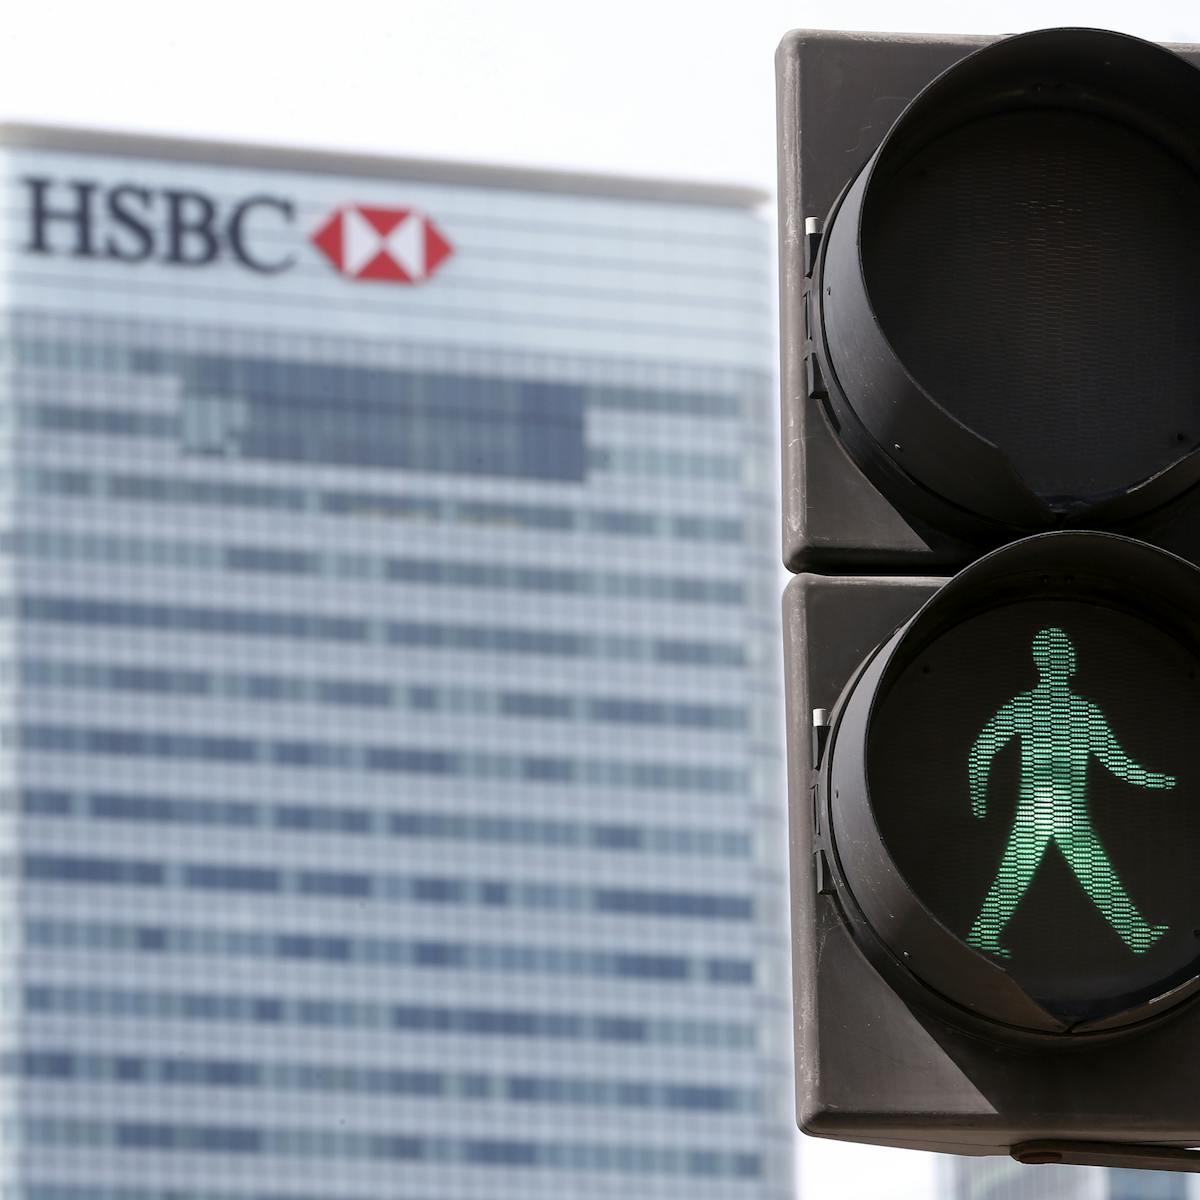 Why Hsbc Decided To Stay In The Uk